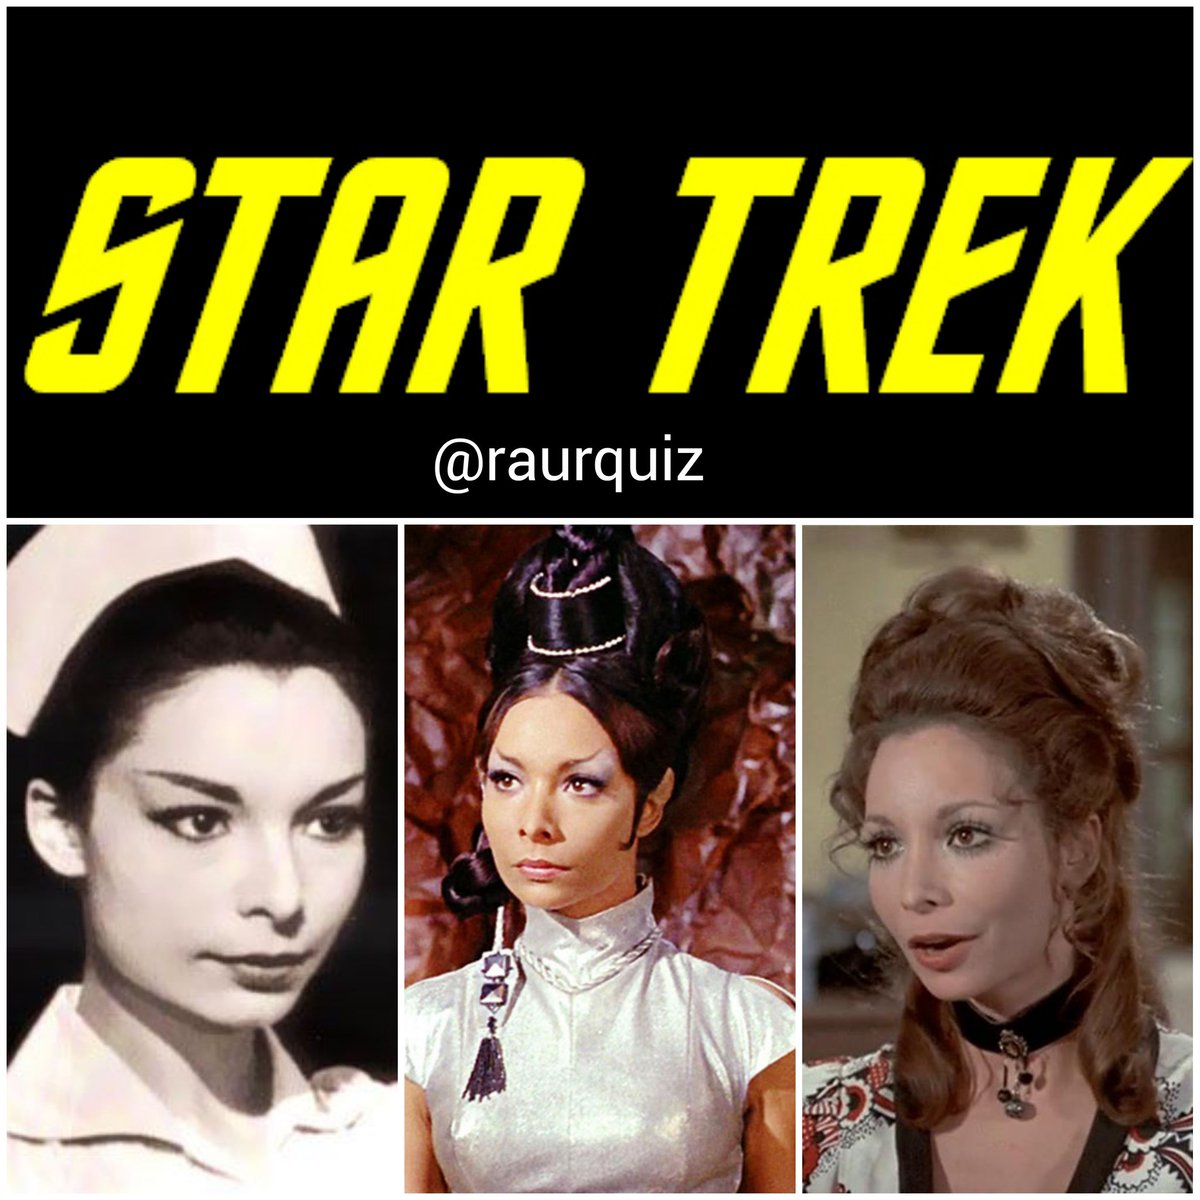 #remembering #ArleneMartel #actress #Tpring #startrek #amoktime #TheTwilightZone #route66 #PerryMason #theprincessandthegunfighter #dreamofjeannie #TheFugitive #hogansheroes #bewithched #TheOuterLimits #columbo #rockfordfiles #therestlessgun #themanfromuncle #missionimpossible